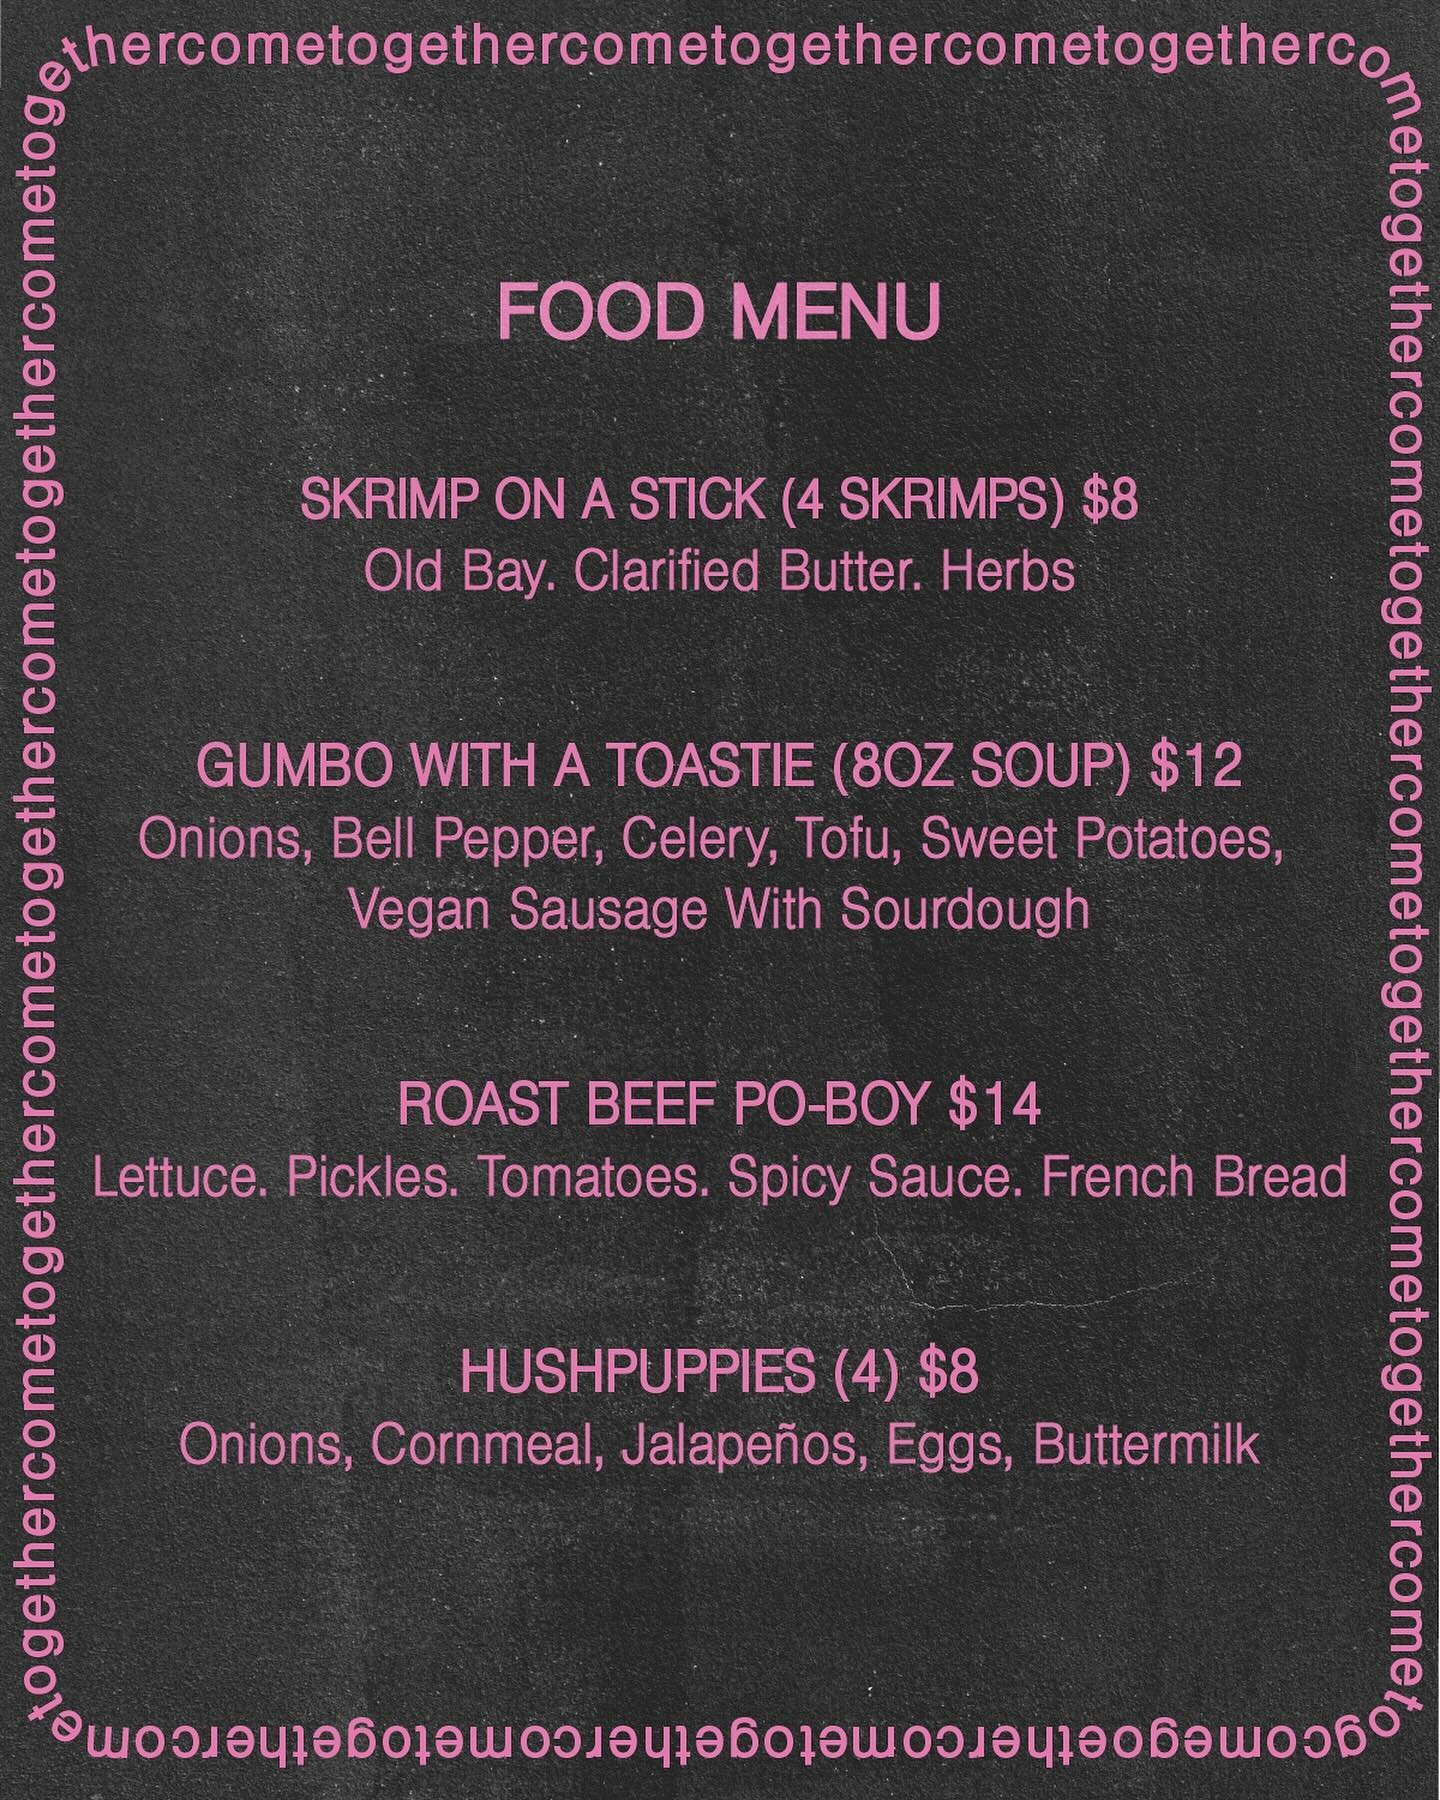 NOLA inspired food and drink menu is here for our industry social on May 21st‼️📣

Huge shoutout to @thelori_ and @theempressfreedom for putting together this menu, swing by next Tuesday to get some grub/bevvys while you meet like minded people🫶

If